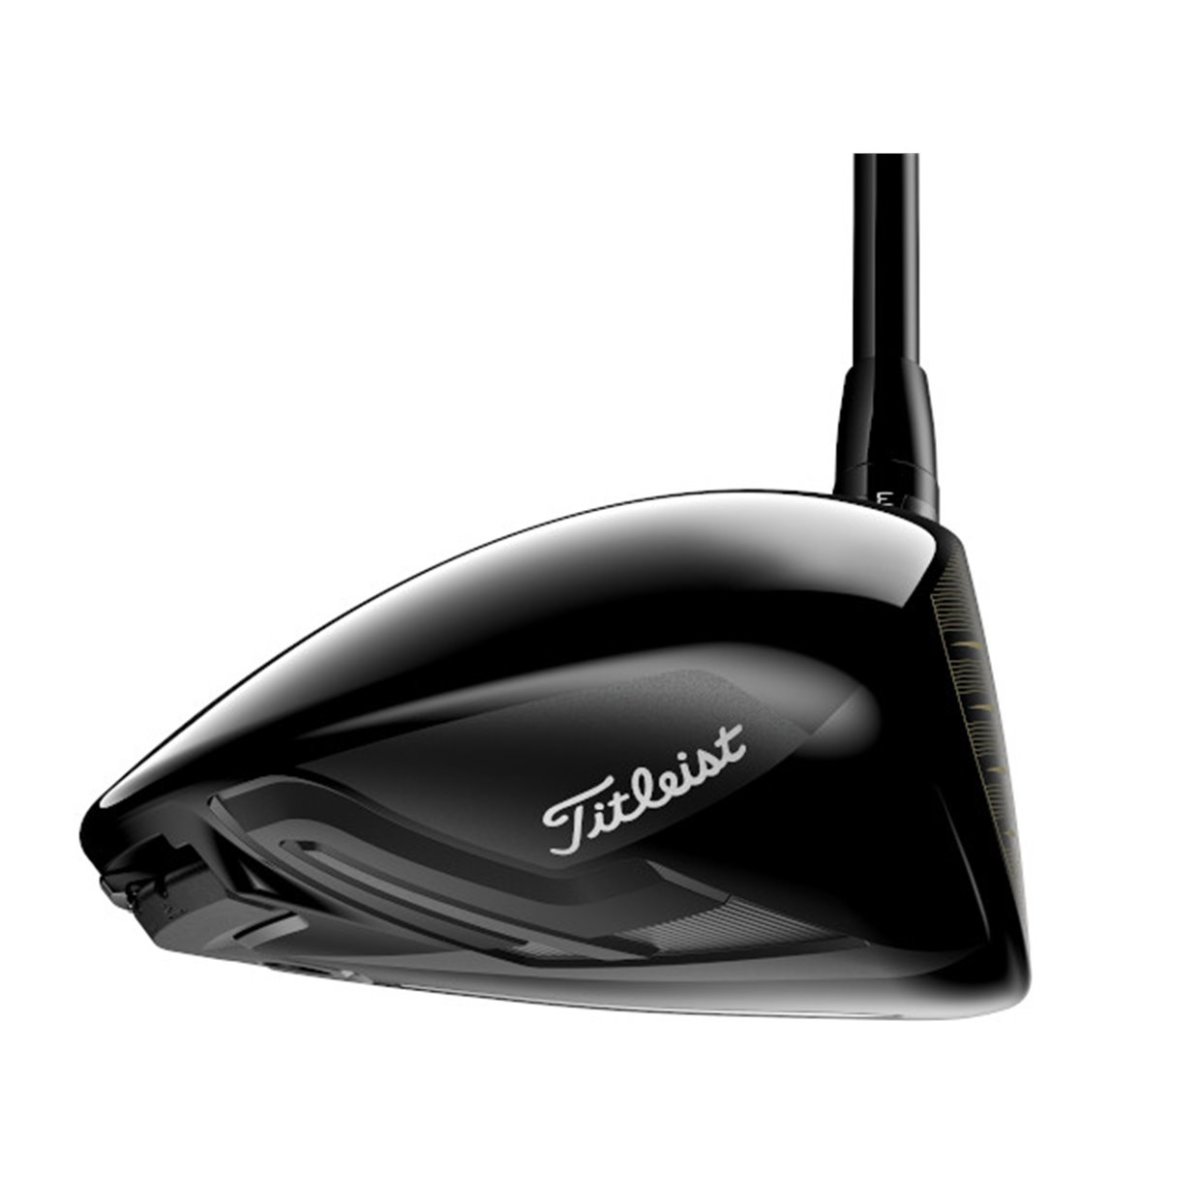 Shop the Titleist TSi3 driver on Morning Read's online pro shop, powered by GlobalGolf.